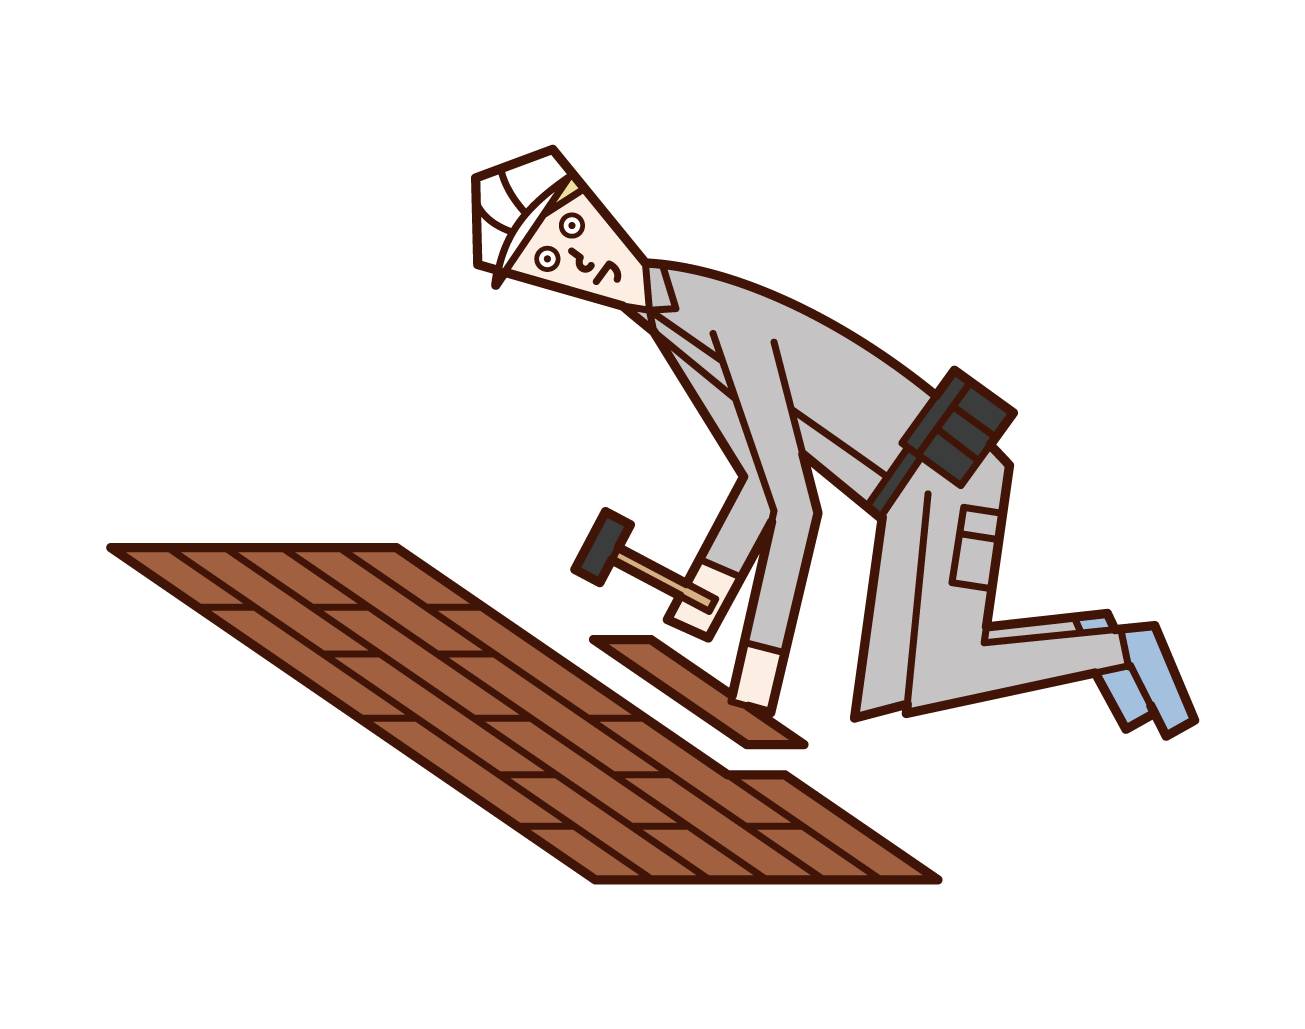 Illustration of a person who pastes flooring and a person (man) who works on interior construction